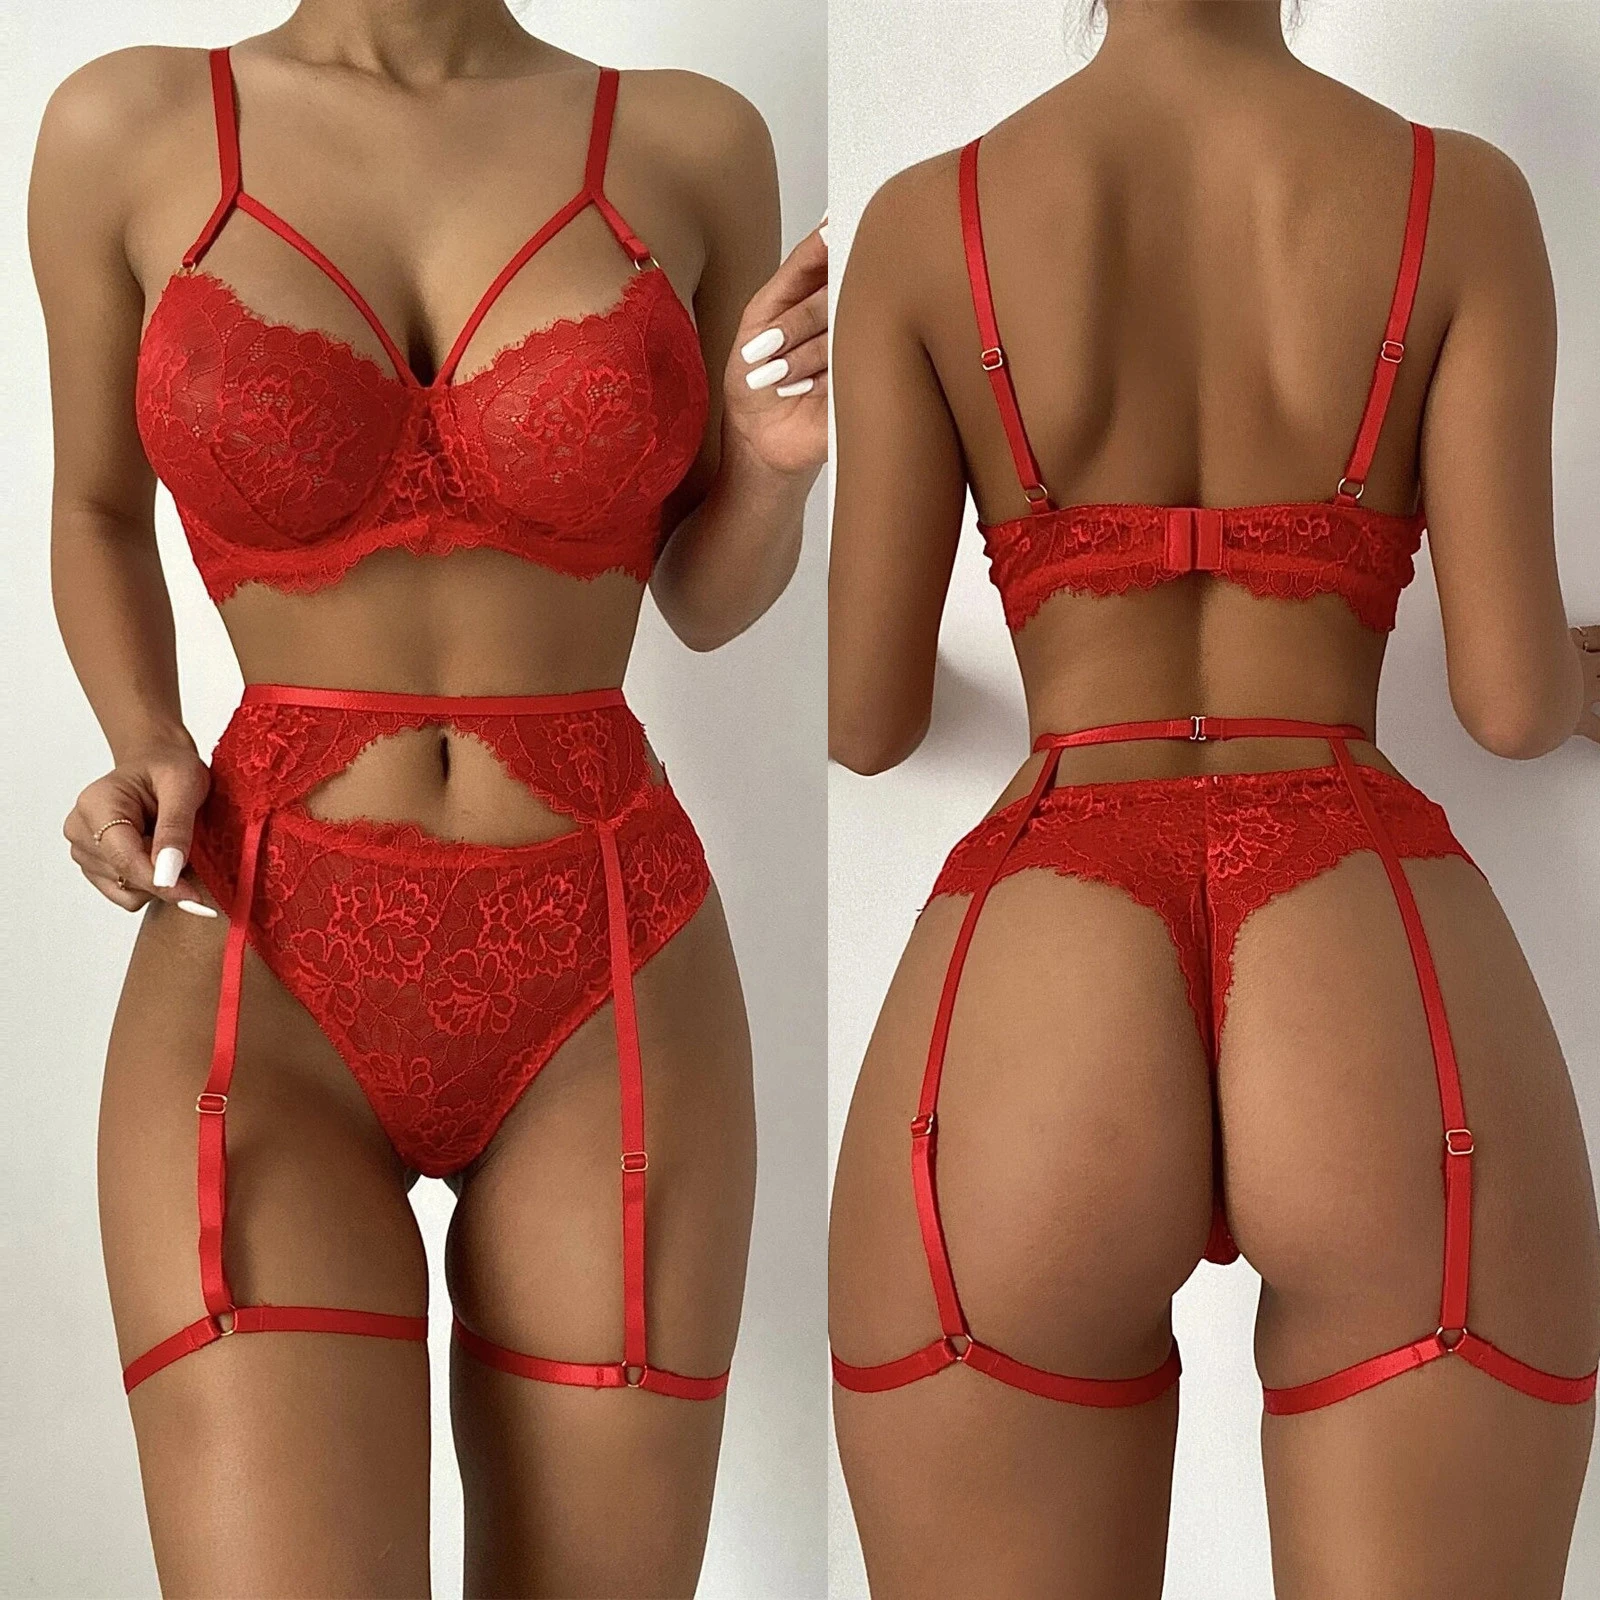 New Sexy Fashion Lace Lingerie Underwear Sleepwear Steel Ring Pajamas Garter Sexy Thong Lingerie Set Lenceria For Woman